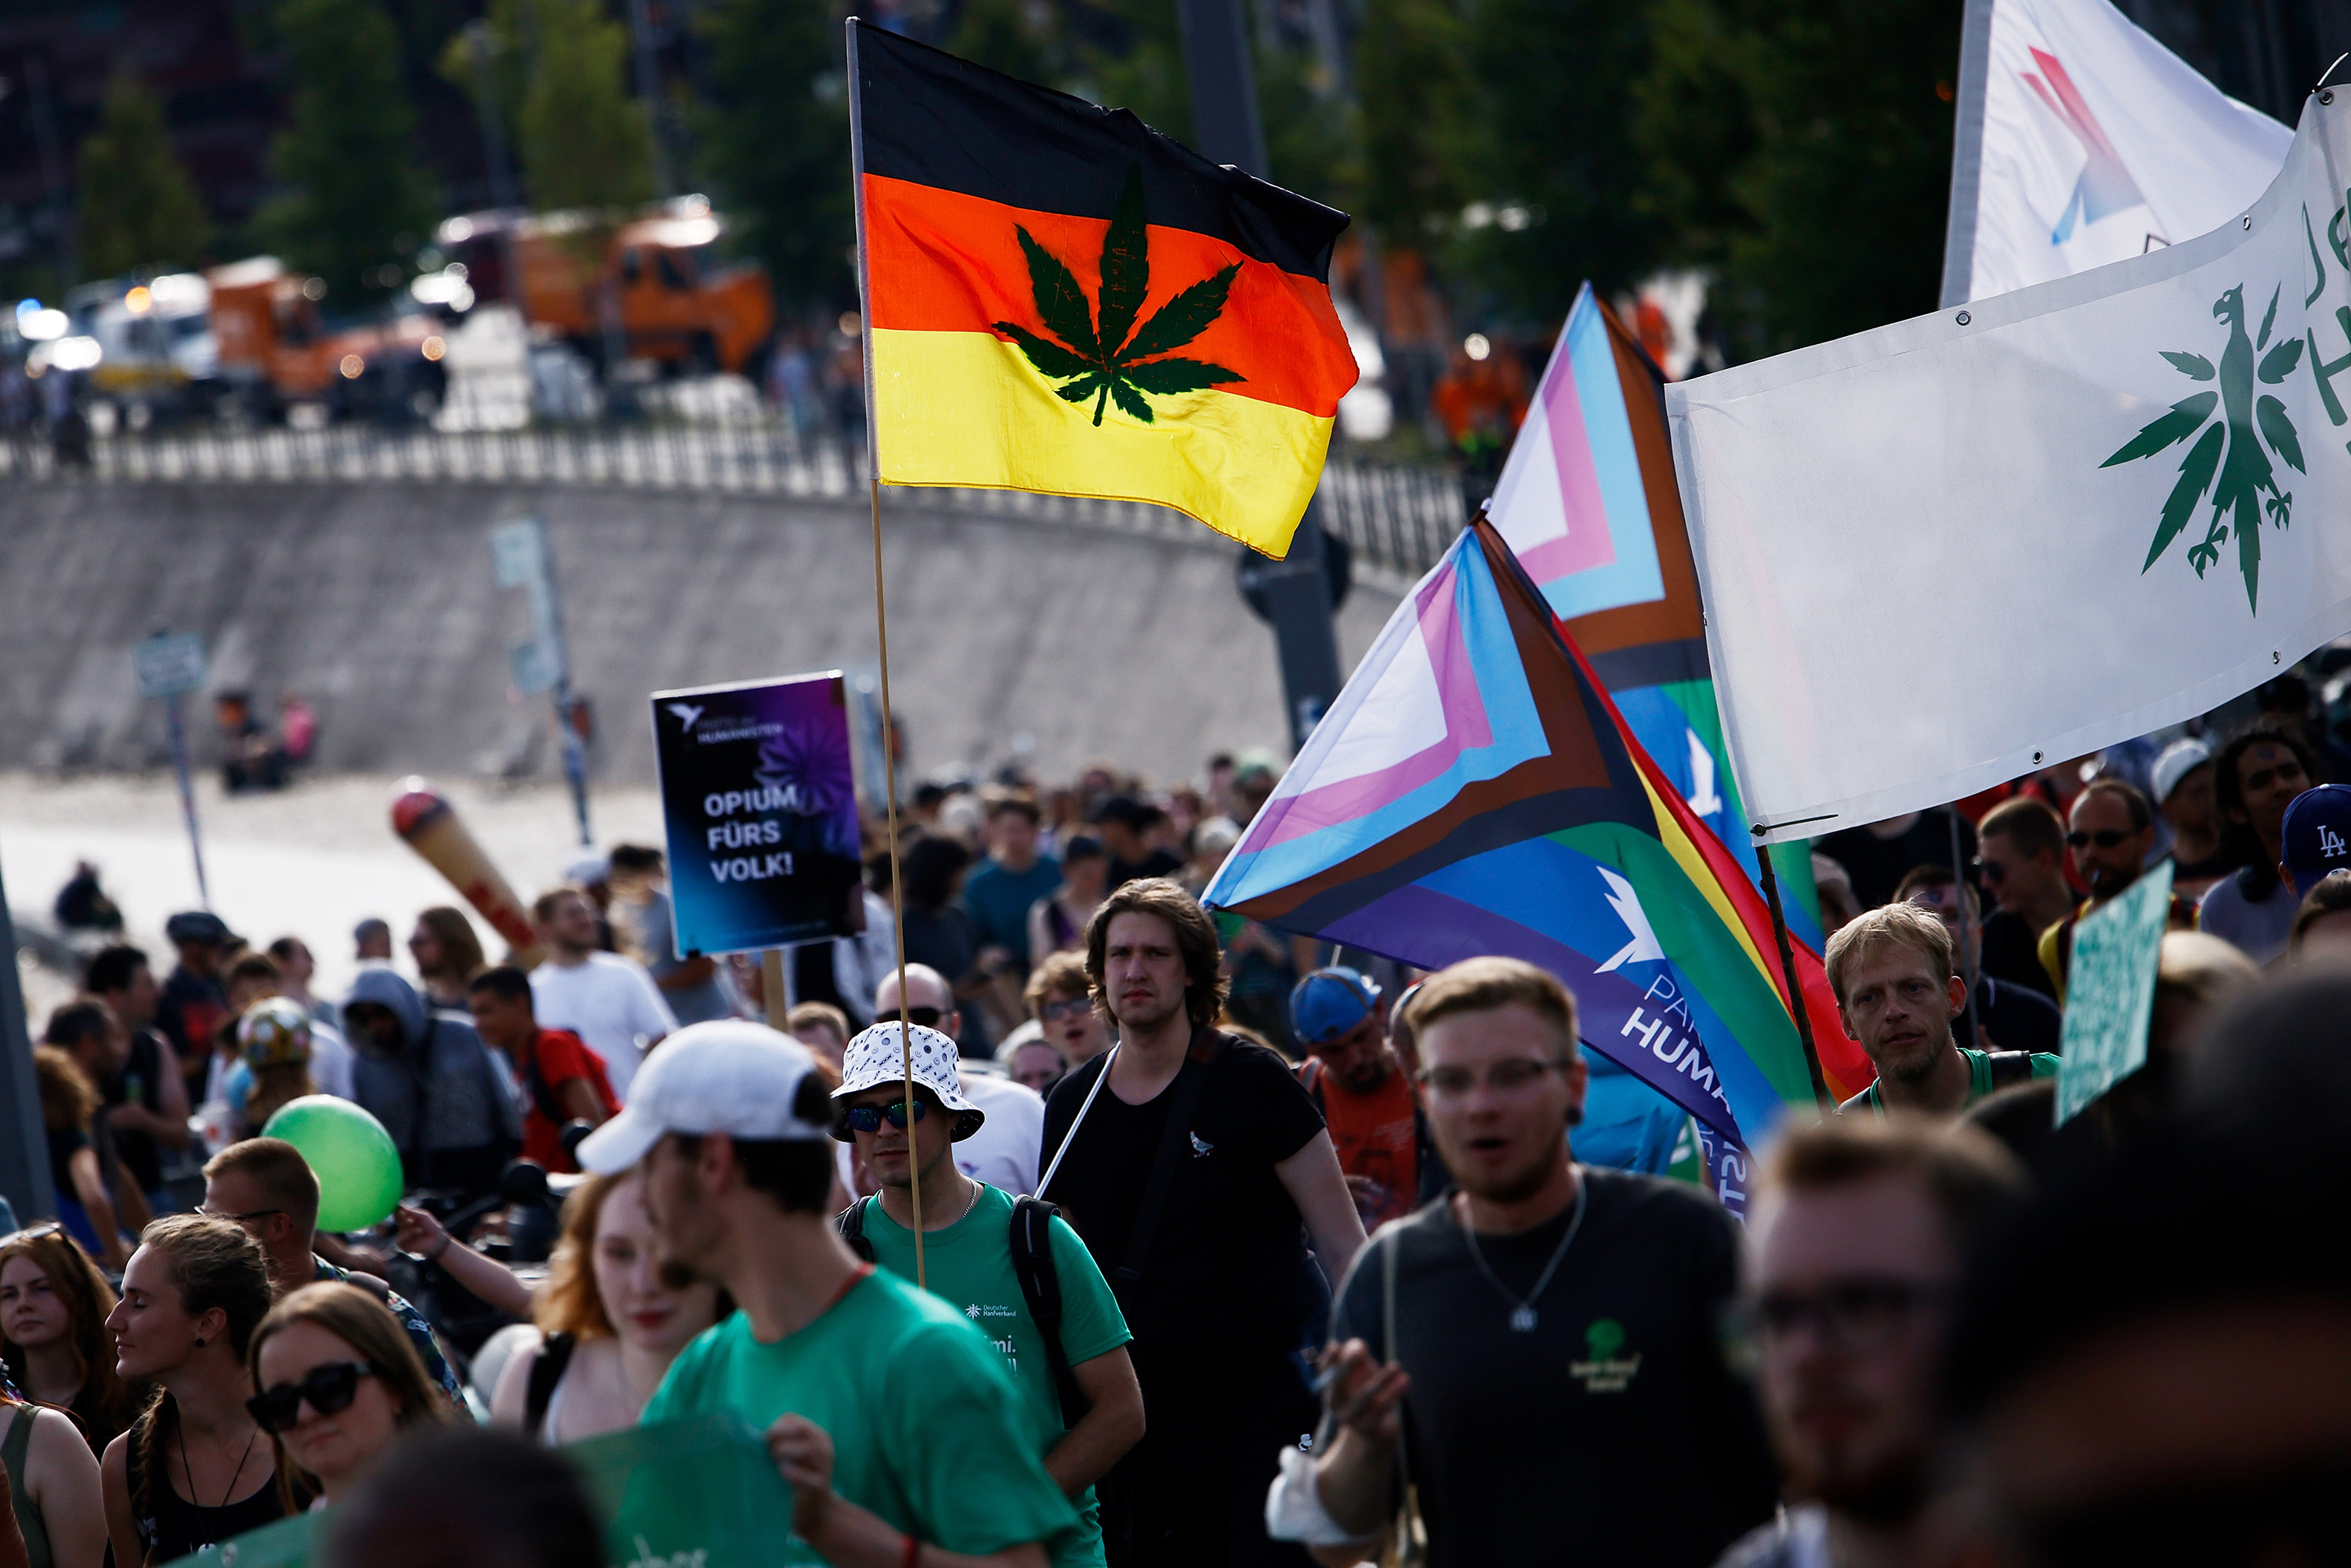 Legal Marijuana Germany to Allow Purchase of Up to 30 Grams of